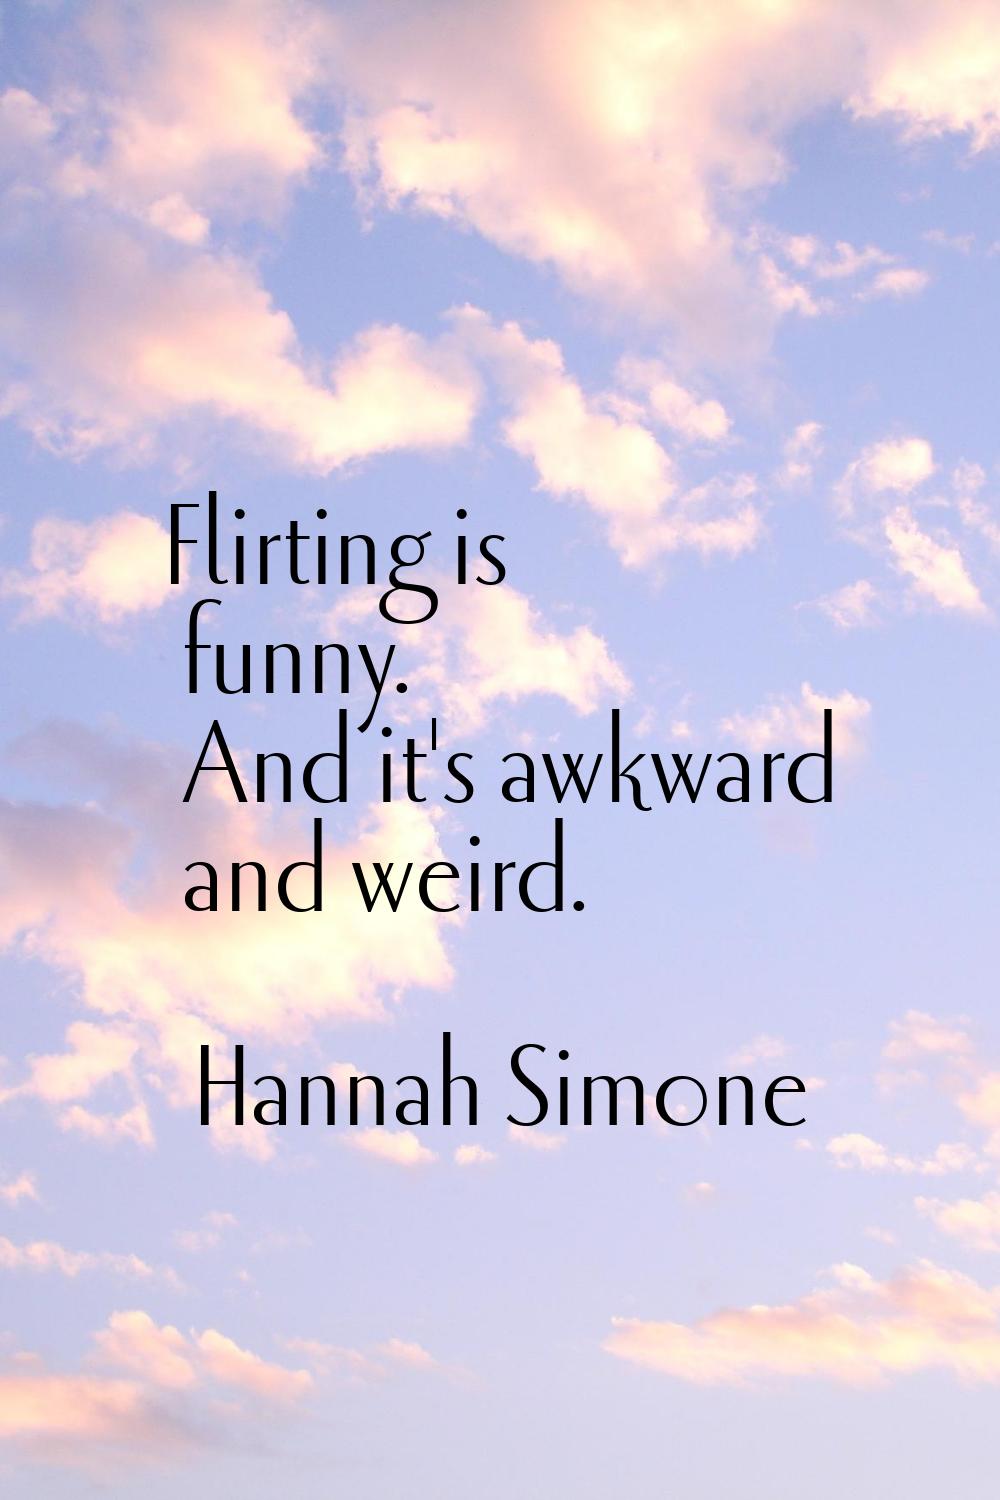 Flirting is funny. And it's awkward and weird.